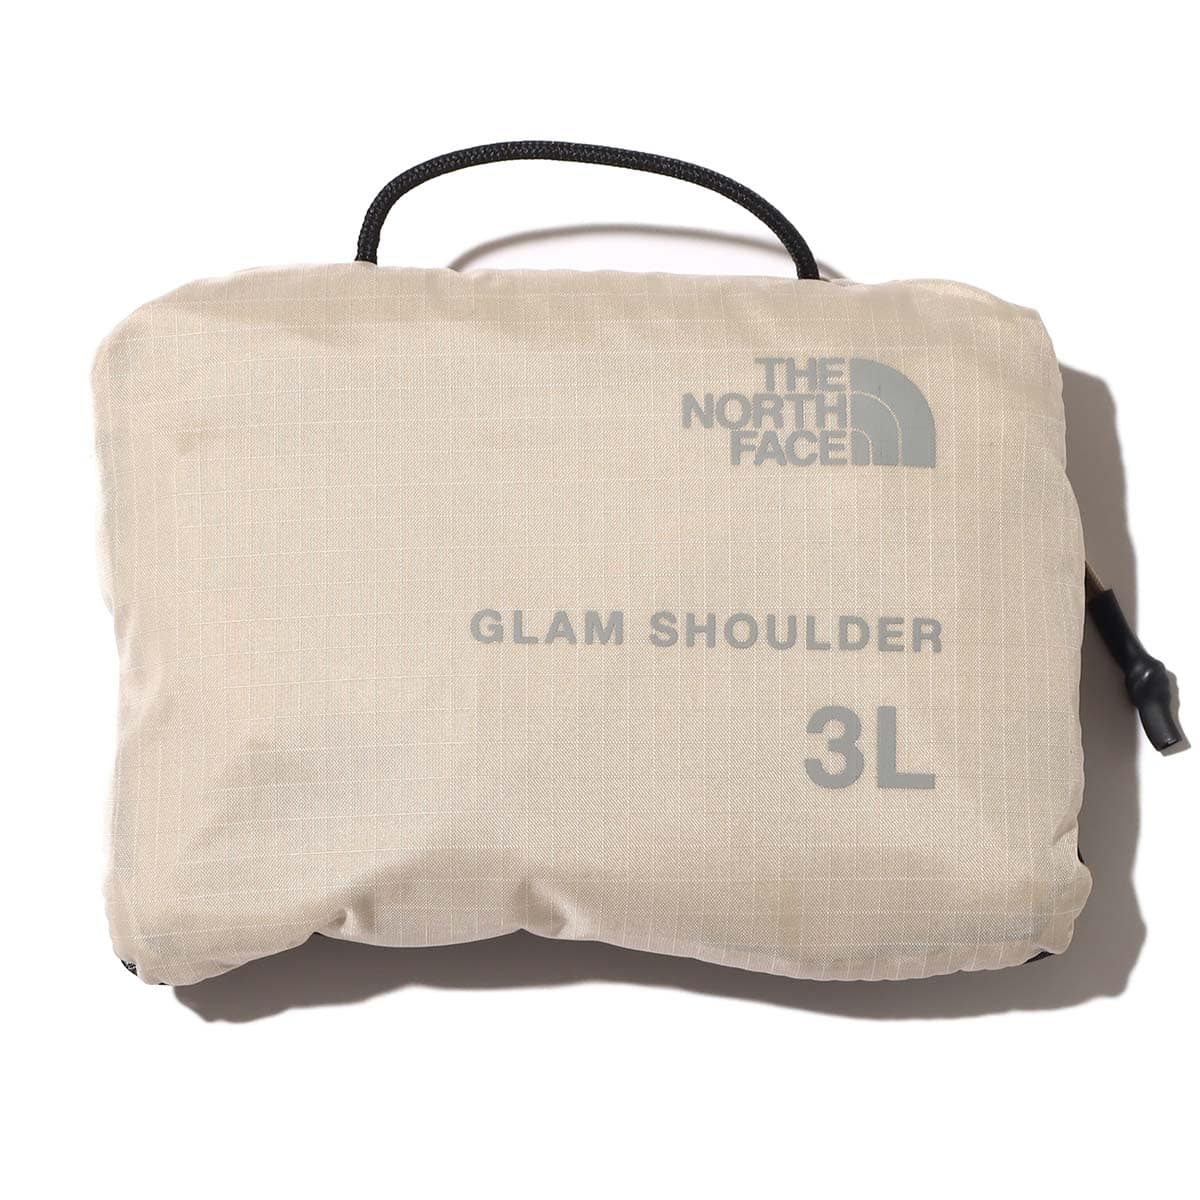 THE NORTH FACE GLAM SHOULDER フォッシルアイボリー 23SS-I